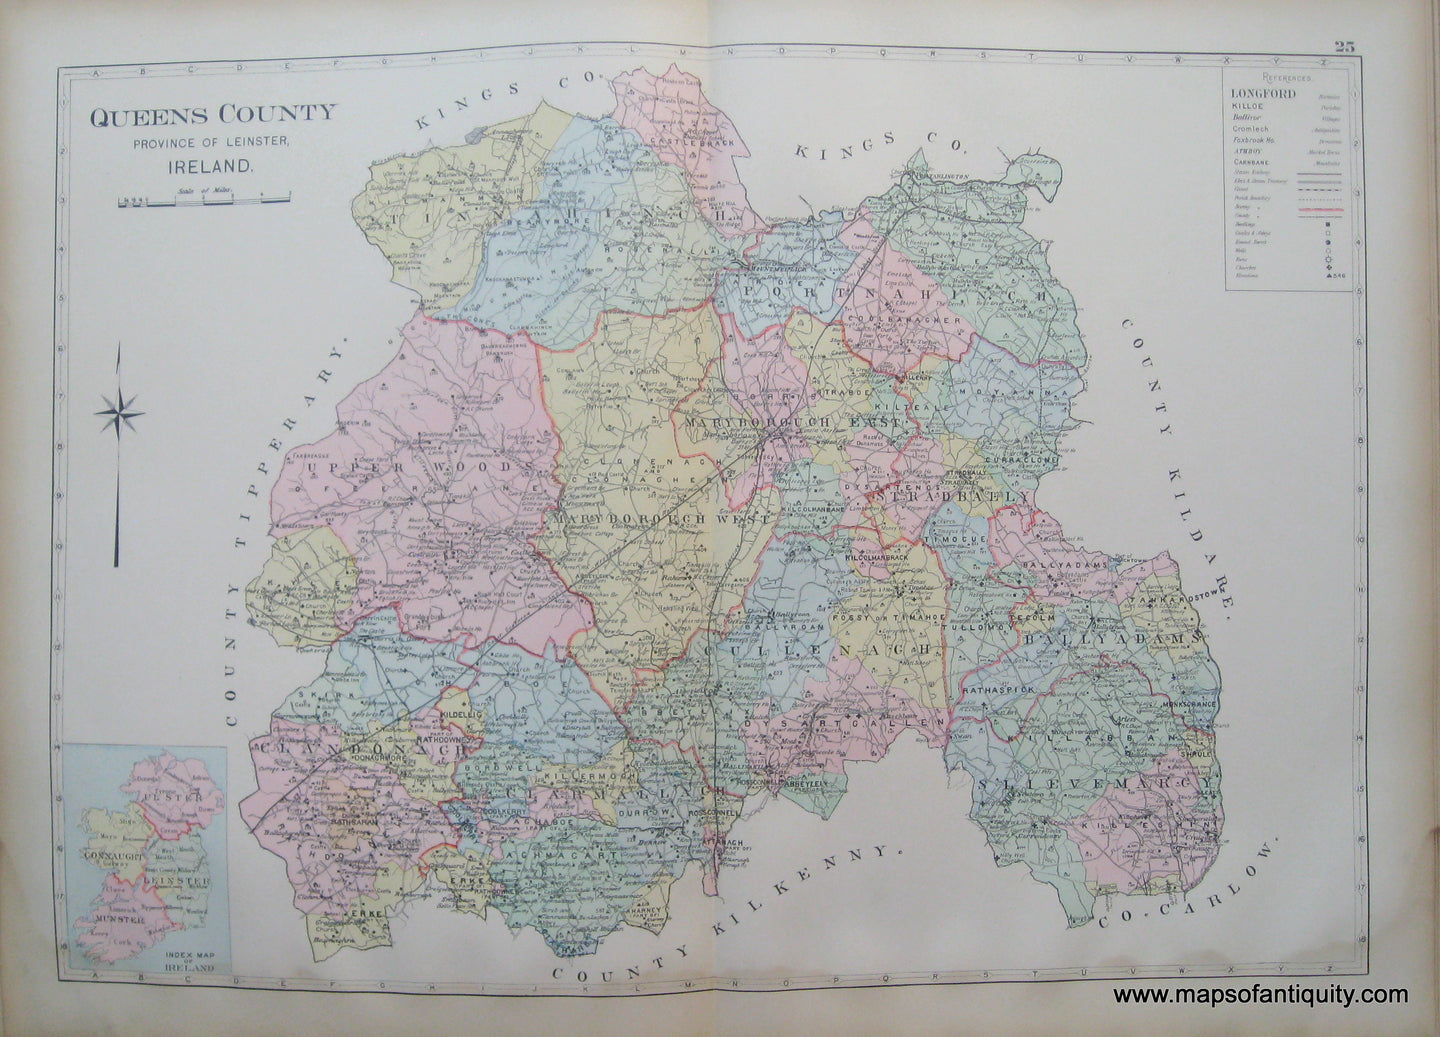 Antique-Map-Queen's-County-Province-of-Leinster-Ireland.-(County-Laois)-Richards-1901-Maps-Of-Antiquity